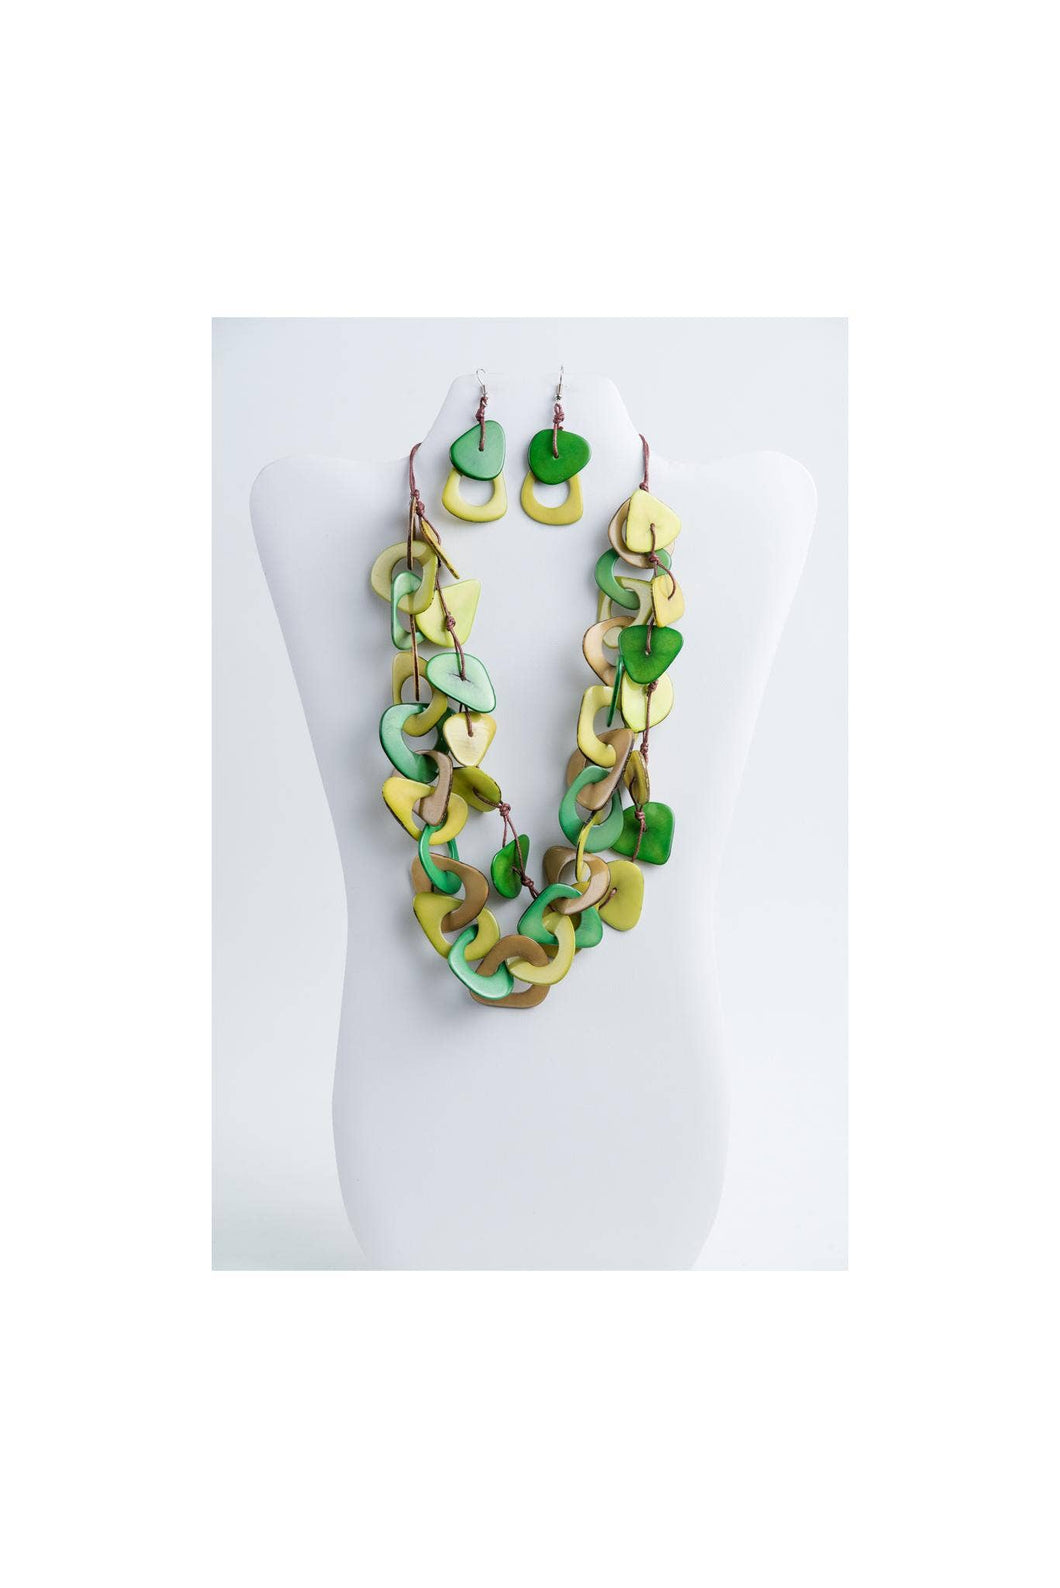 Charli Two Stranded Statement Necklace and Earrings: Tones of Green